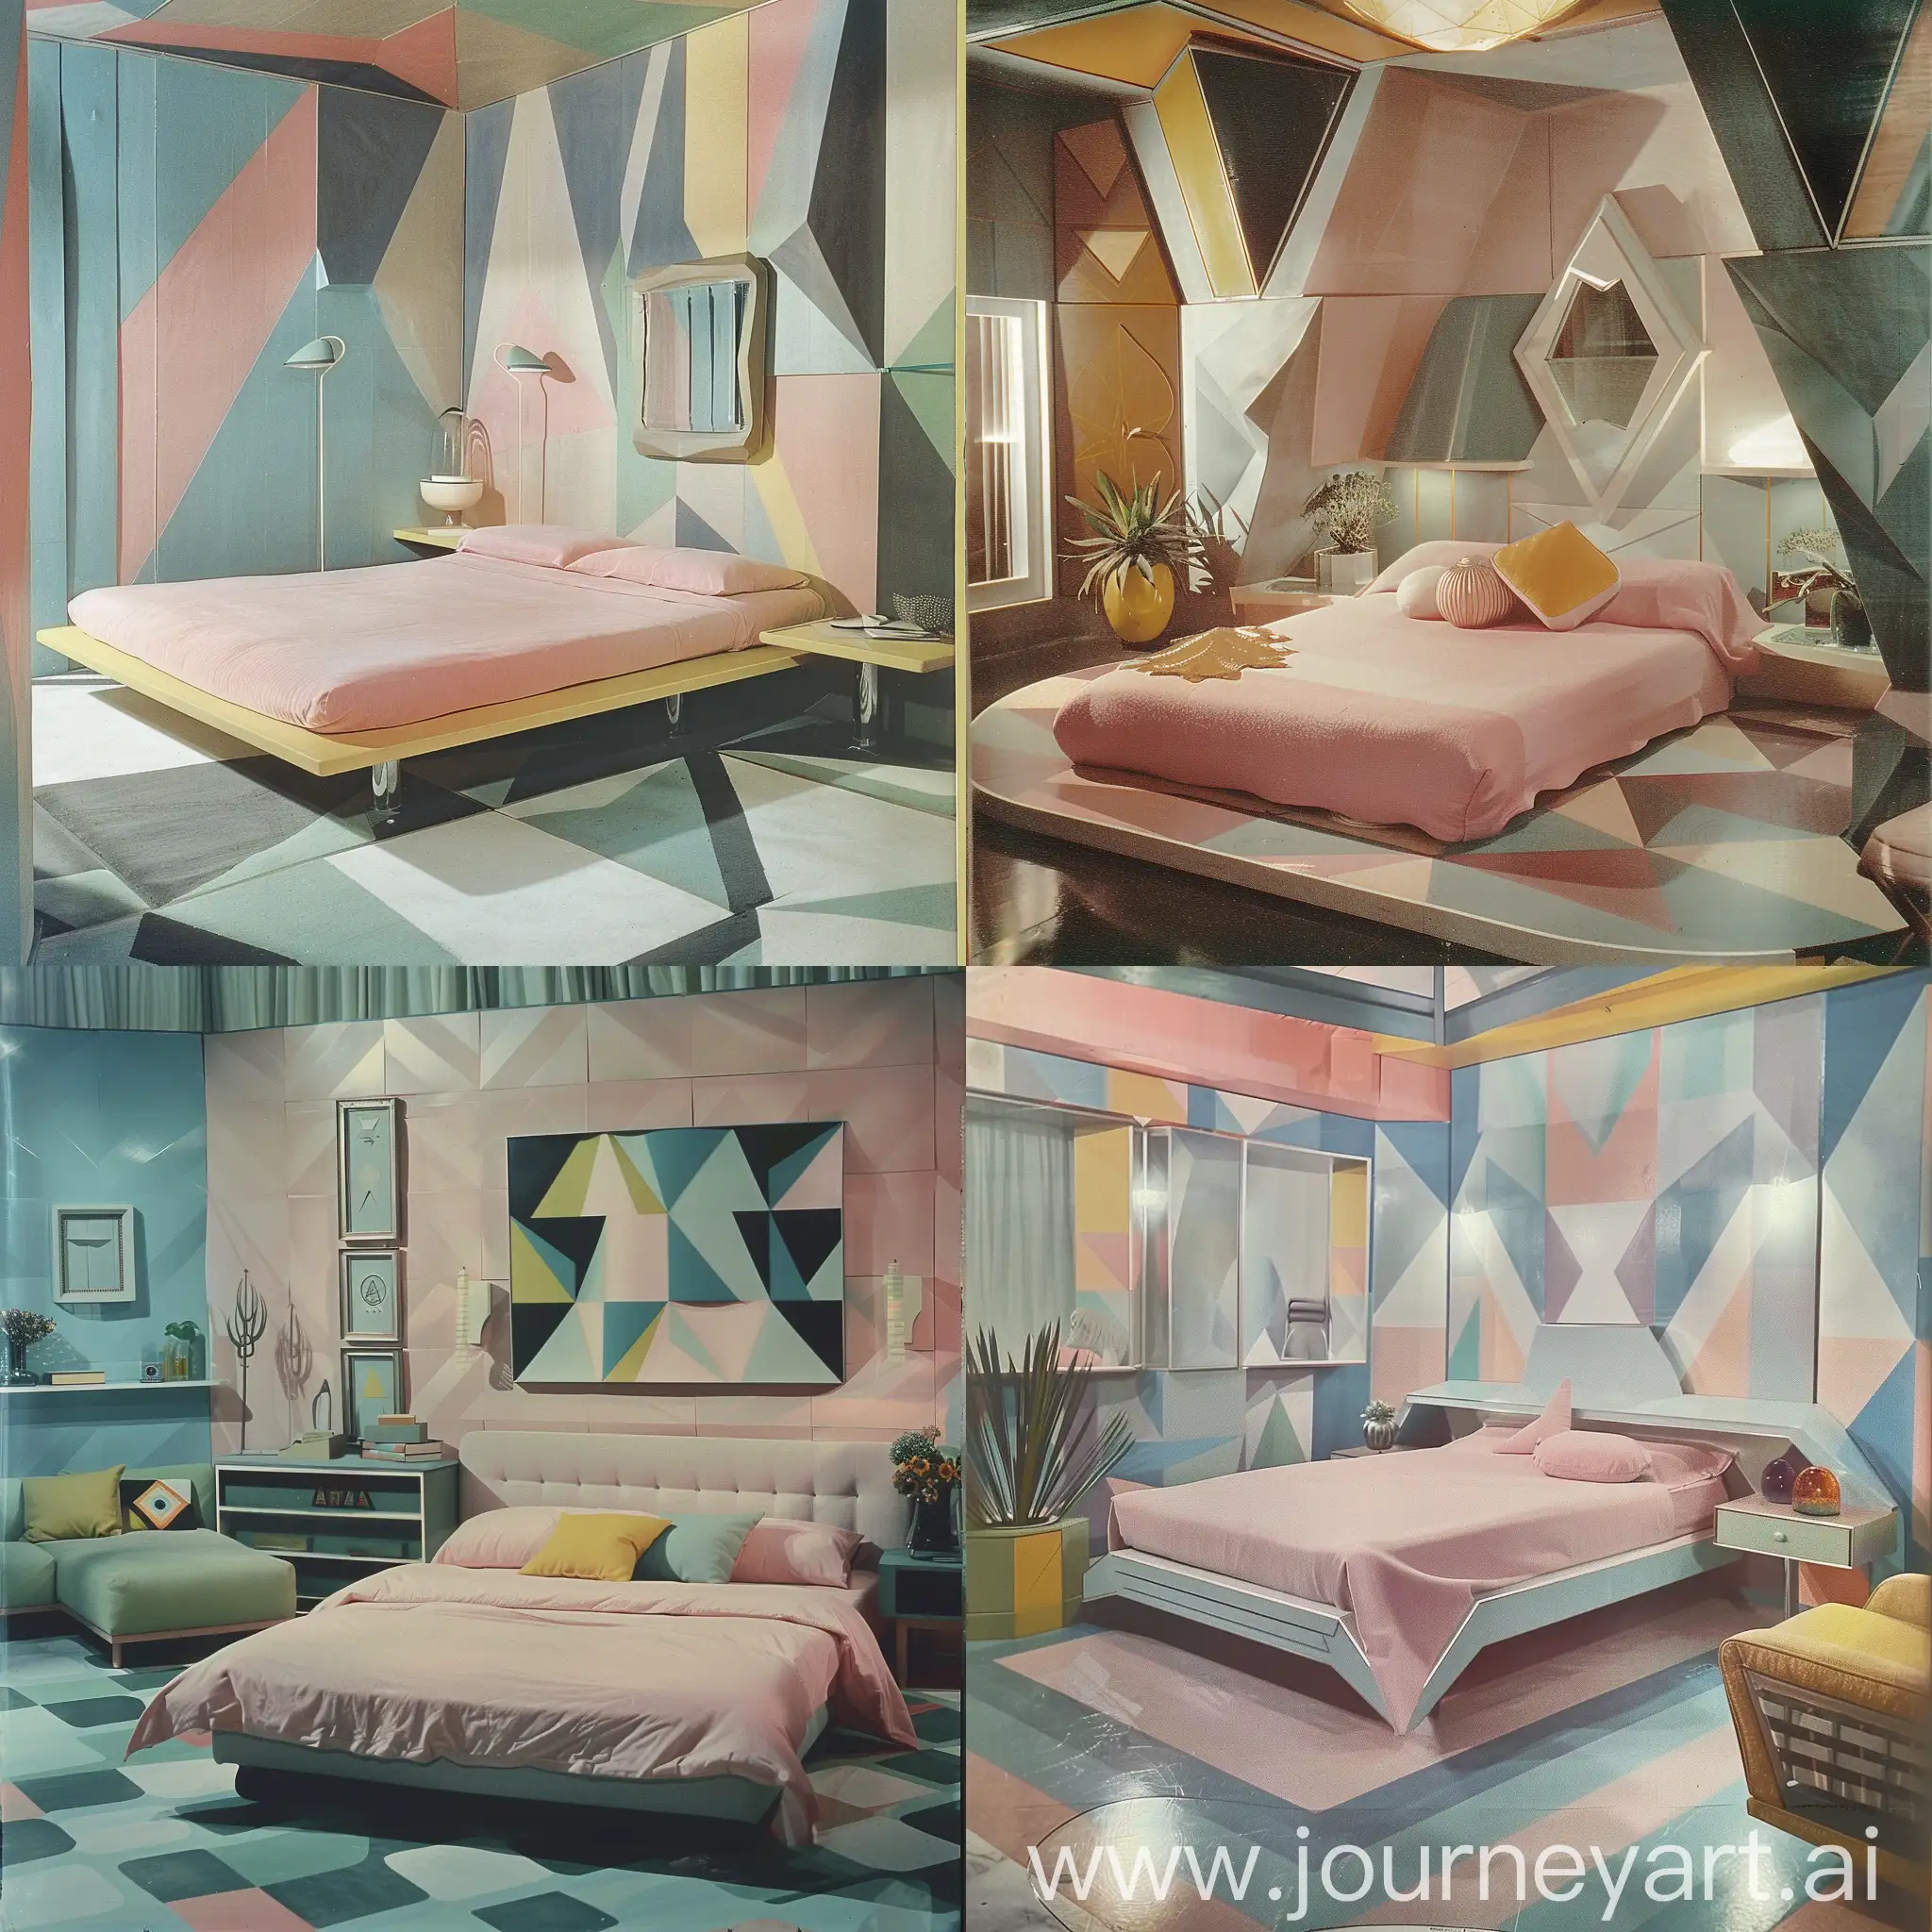 a room with geometric decor and a pastel pink bed, screengrab from 1960s movie